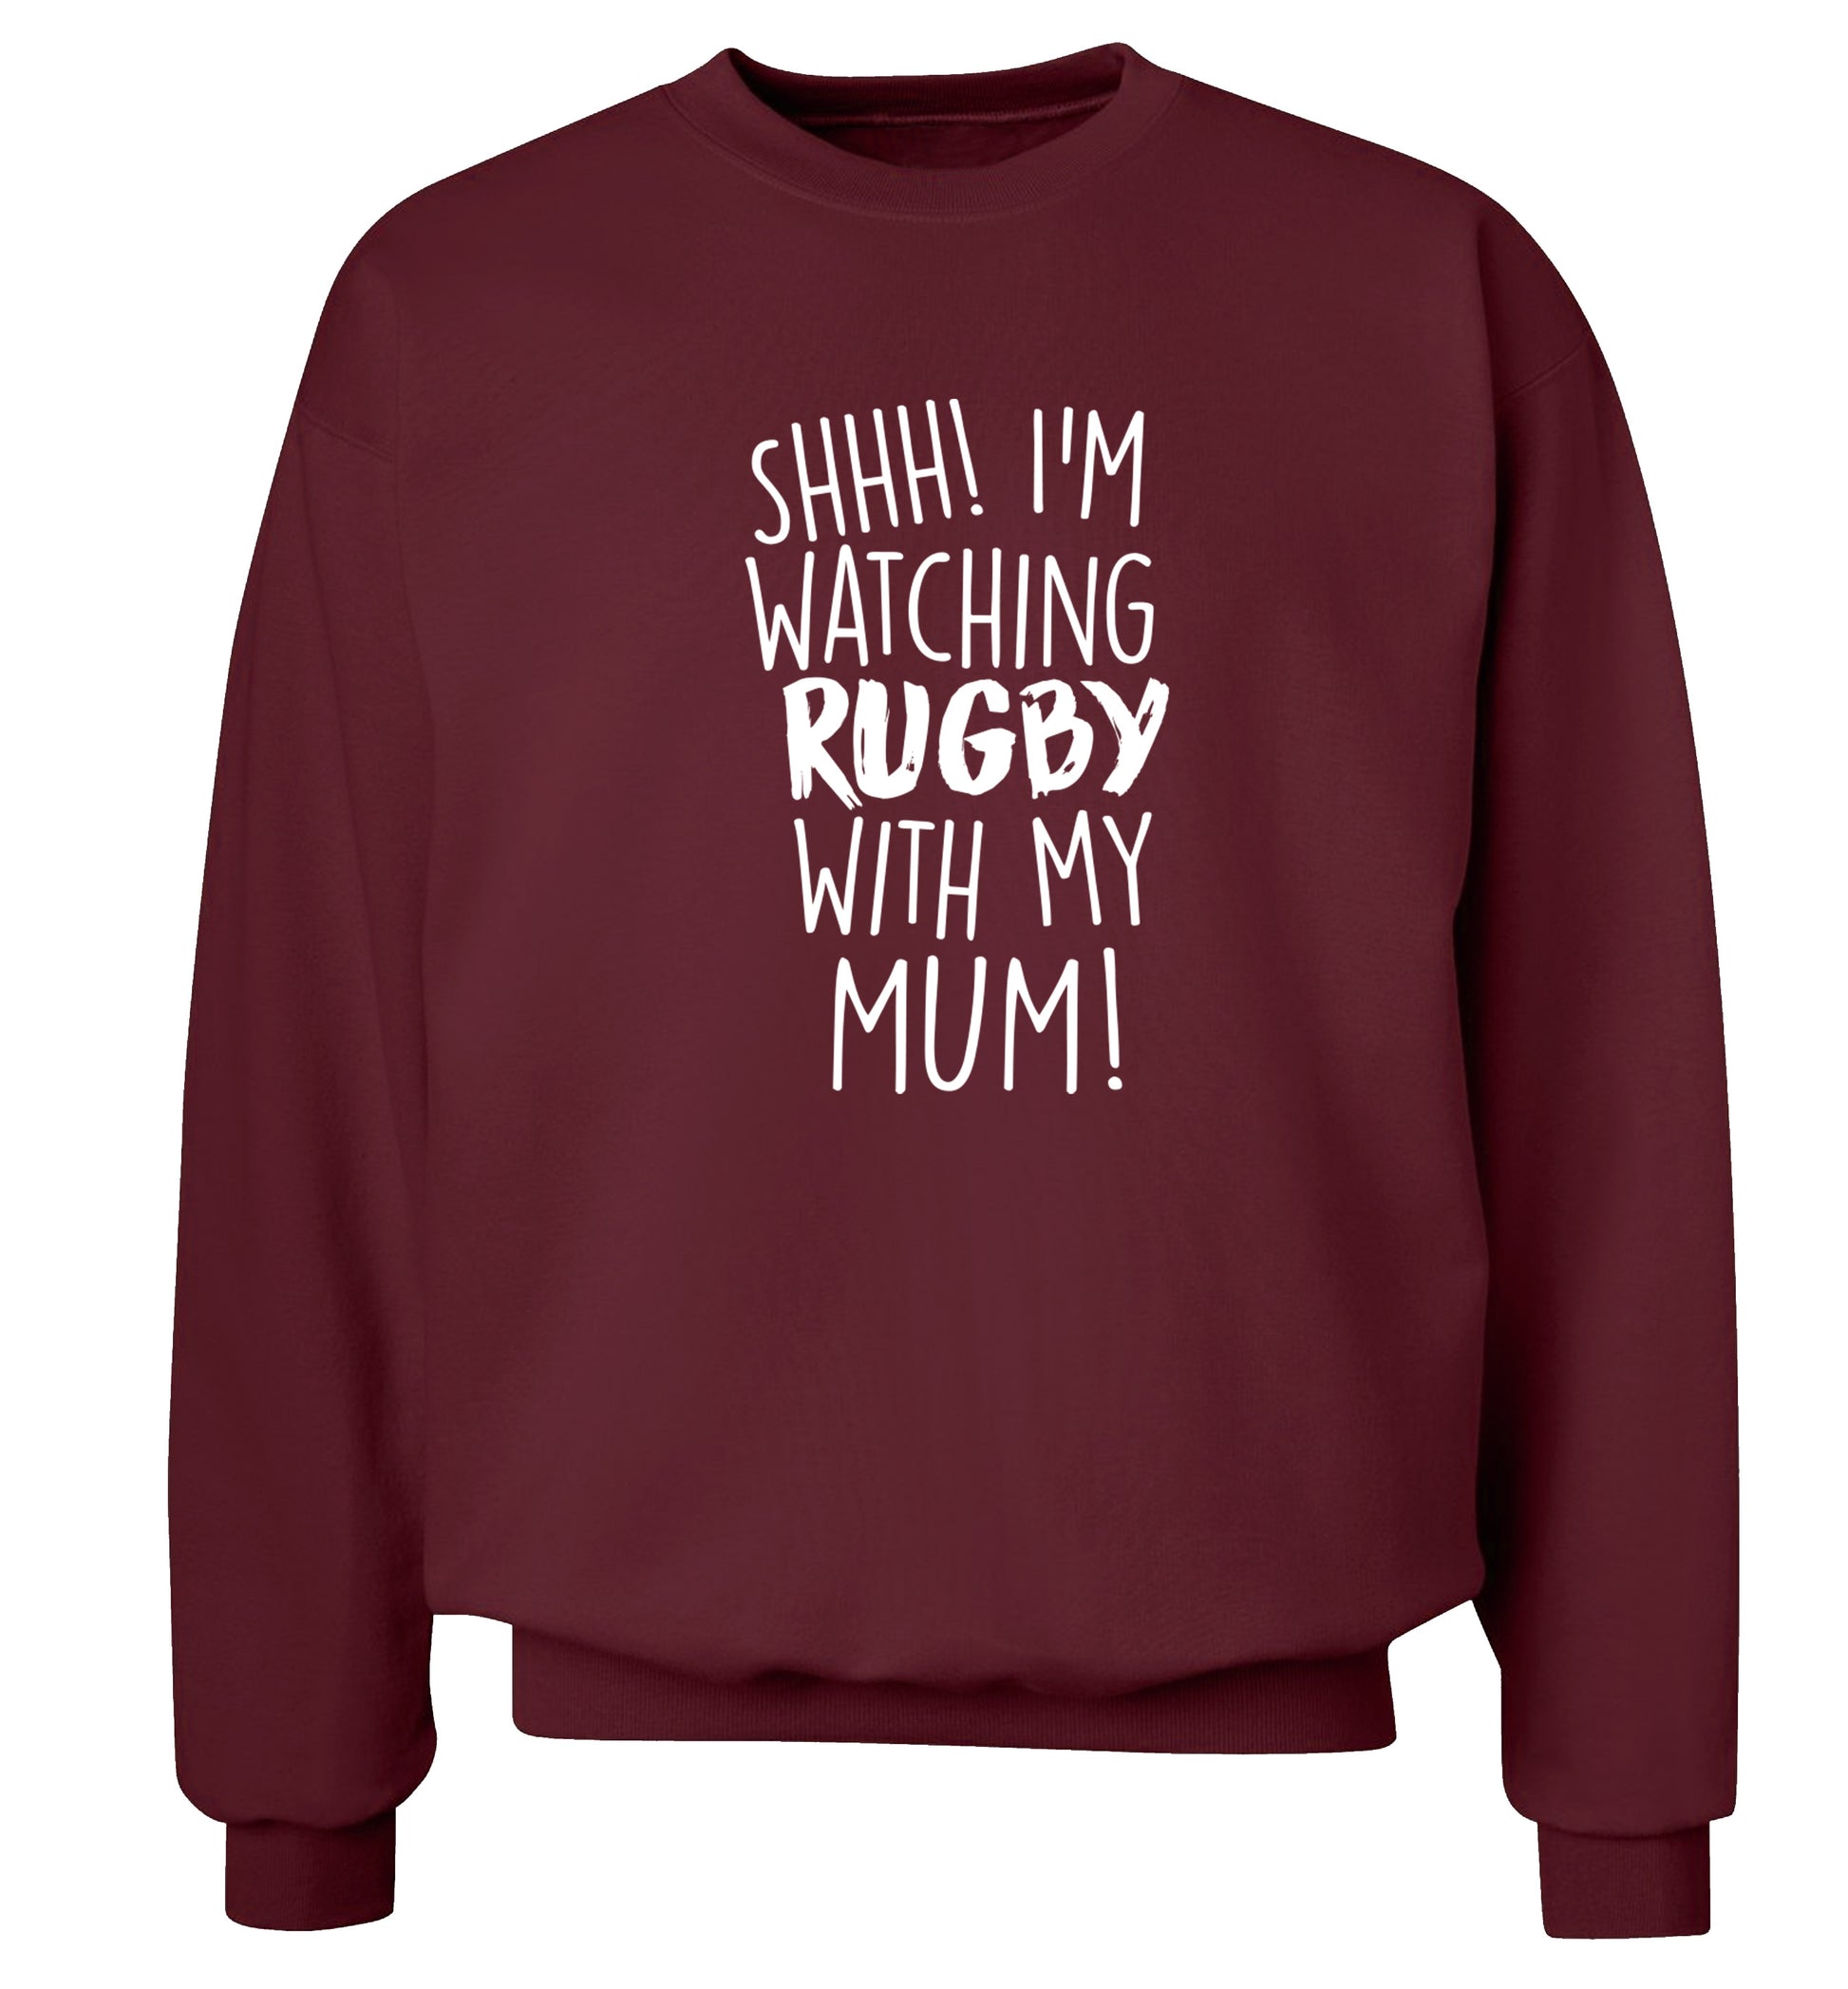 Shh... I'm watching rugby with my mum Adult's unisex maroon Sweater 2XL